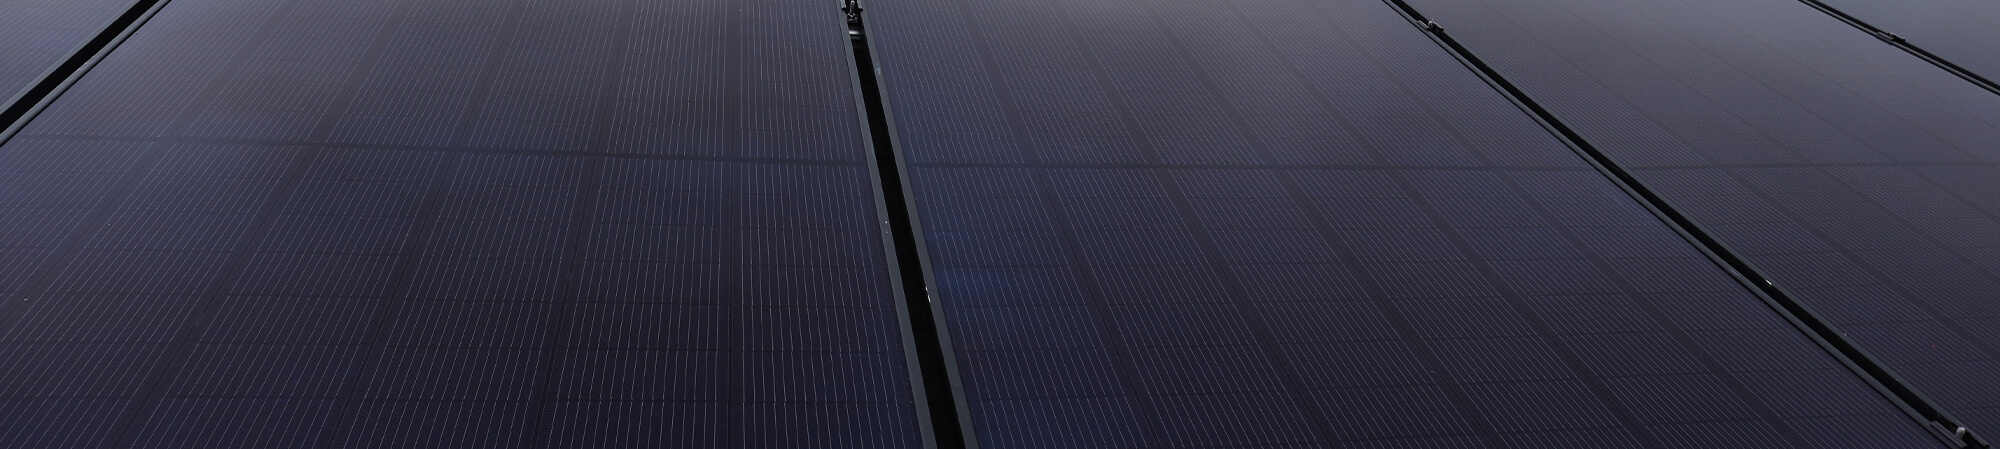 Super close view of solar panels installed horizontally